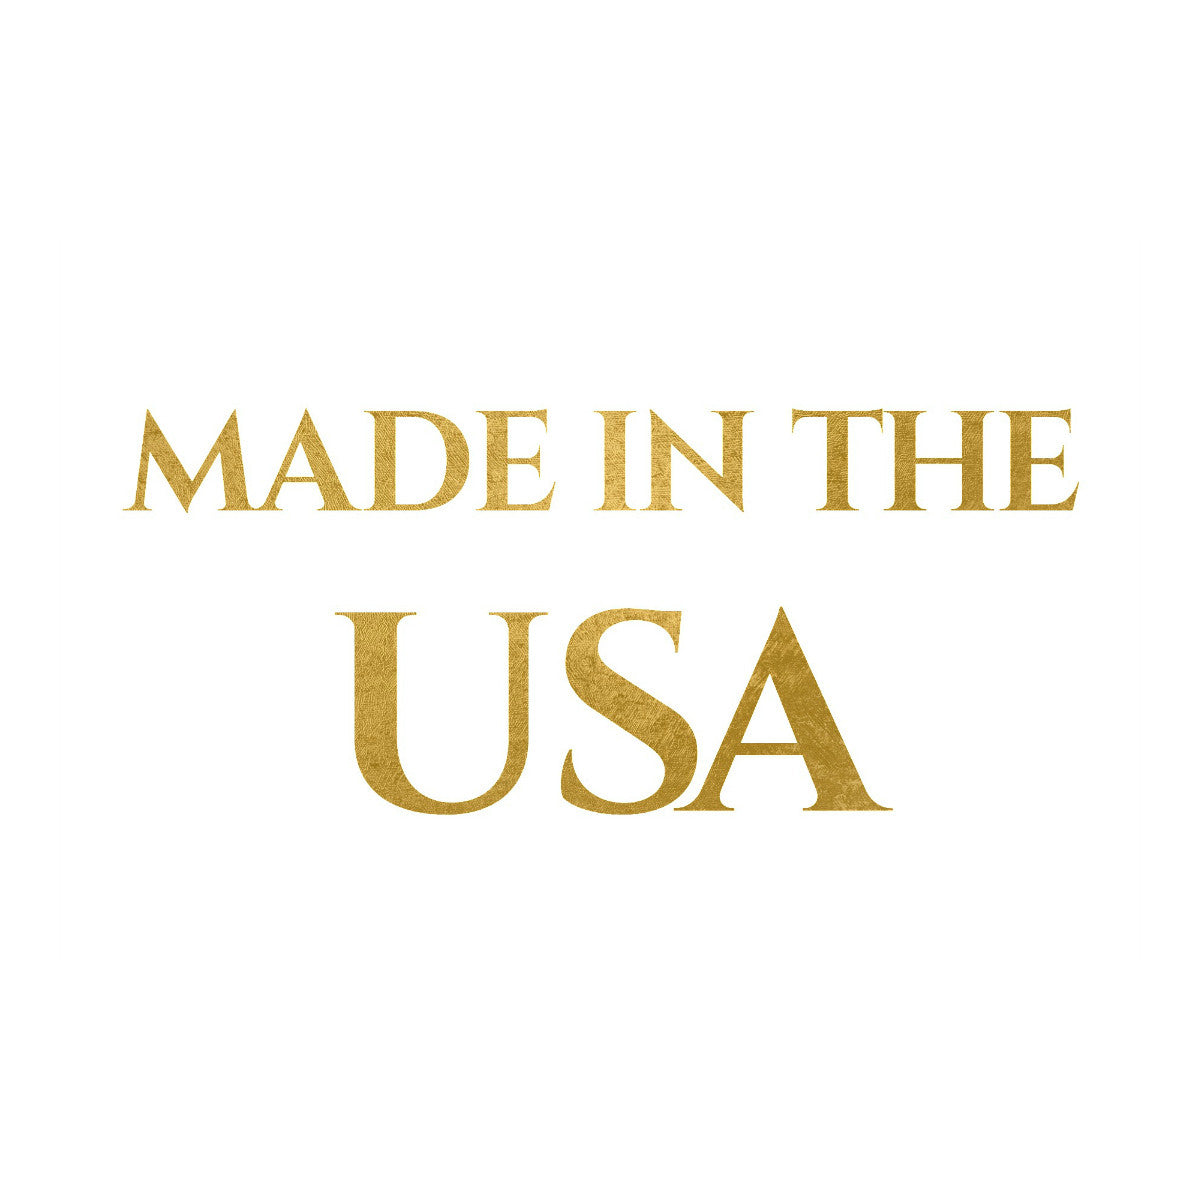 Our satin pillowcases and satin travel pillows are made in the USA.